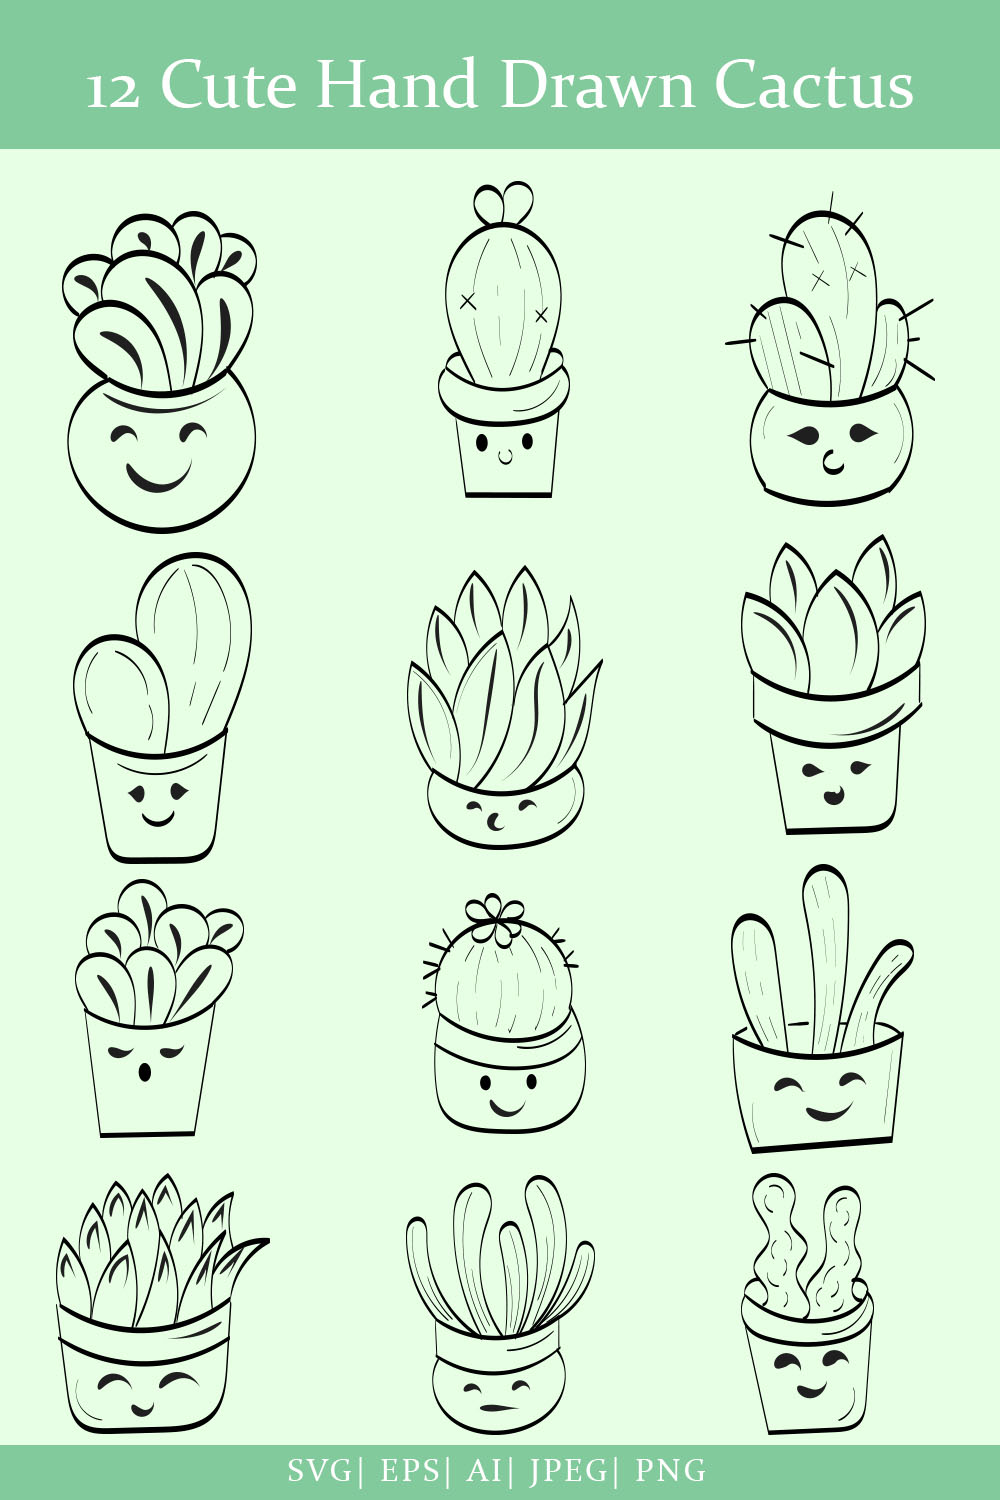 12 Cute Hand Drawn Cactus - Only $10 pinterest image.